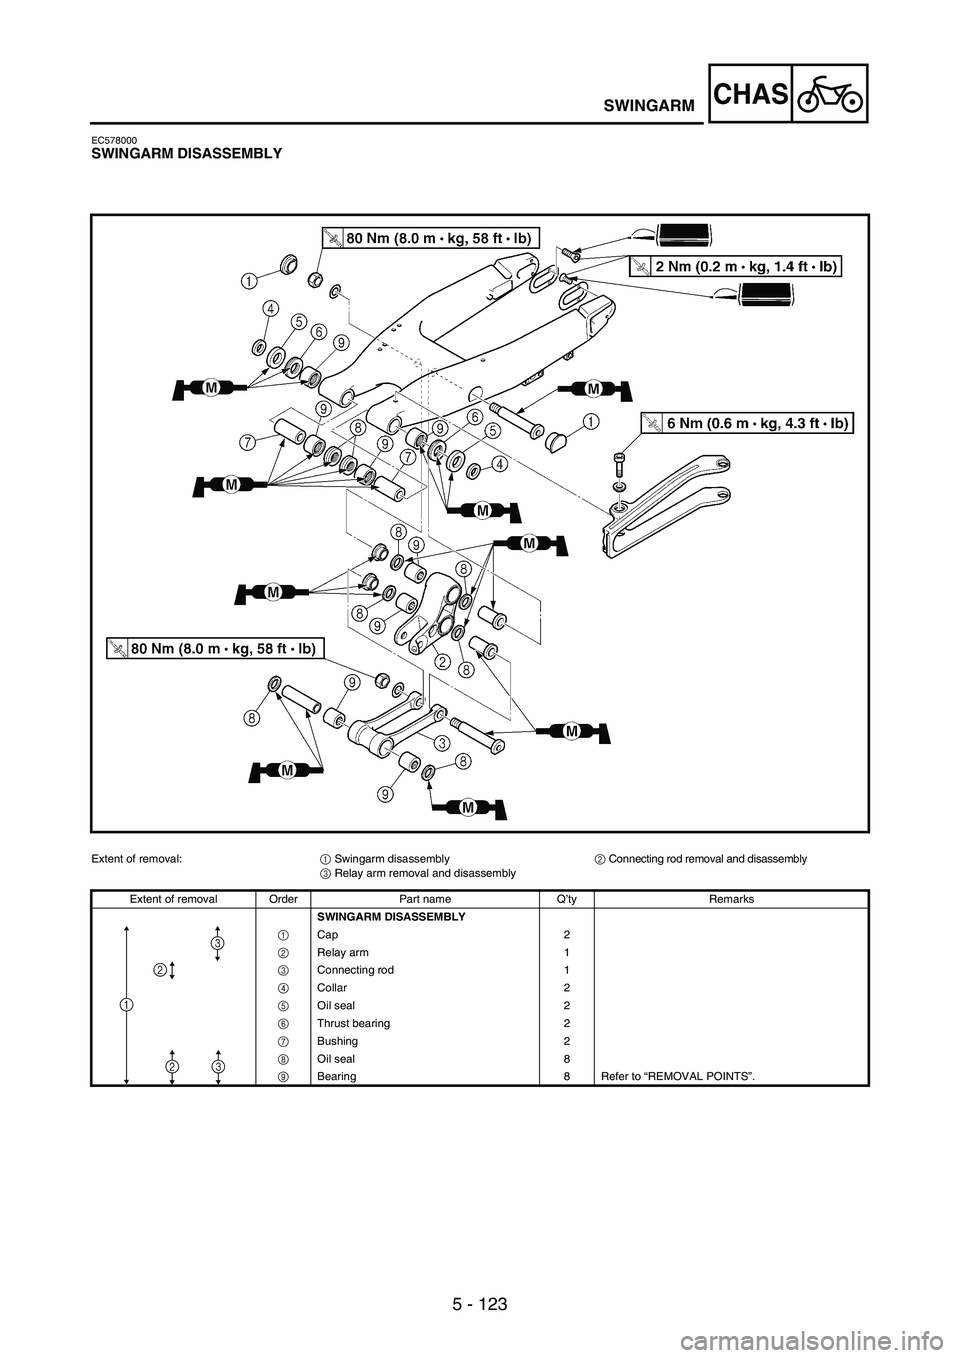 YAMAHA WR 250F 2004  Manuale de Empleo (in Spanish) 5 - 123
CHASSWINGARM
EC578000SWINGARM DISASSEMBLY
Extent of removal:
1 Swingarm disassembly
2 Connecting rod removal and disassembly
3 Relay arm removal and disassembly
Extent of removal Order Part na